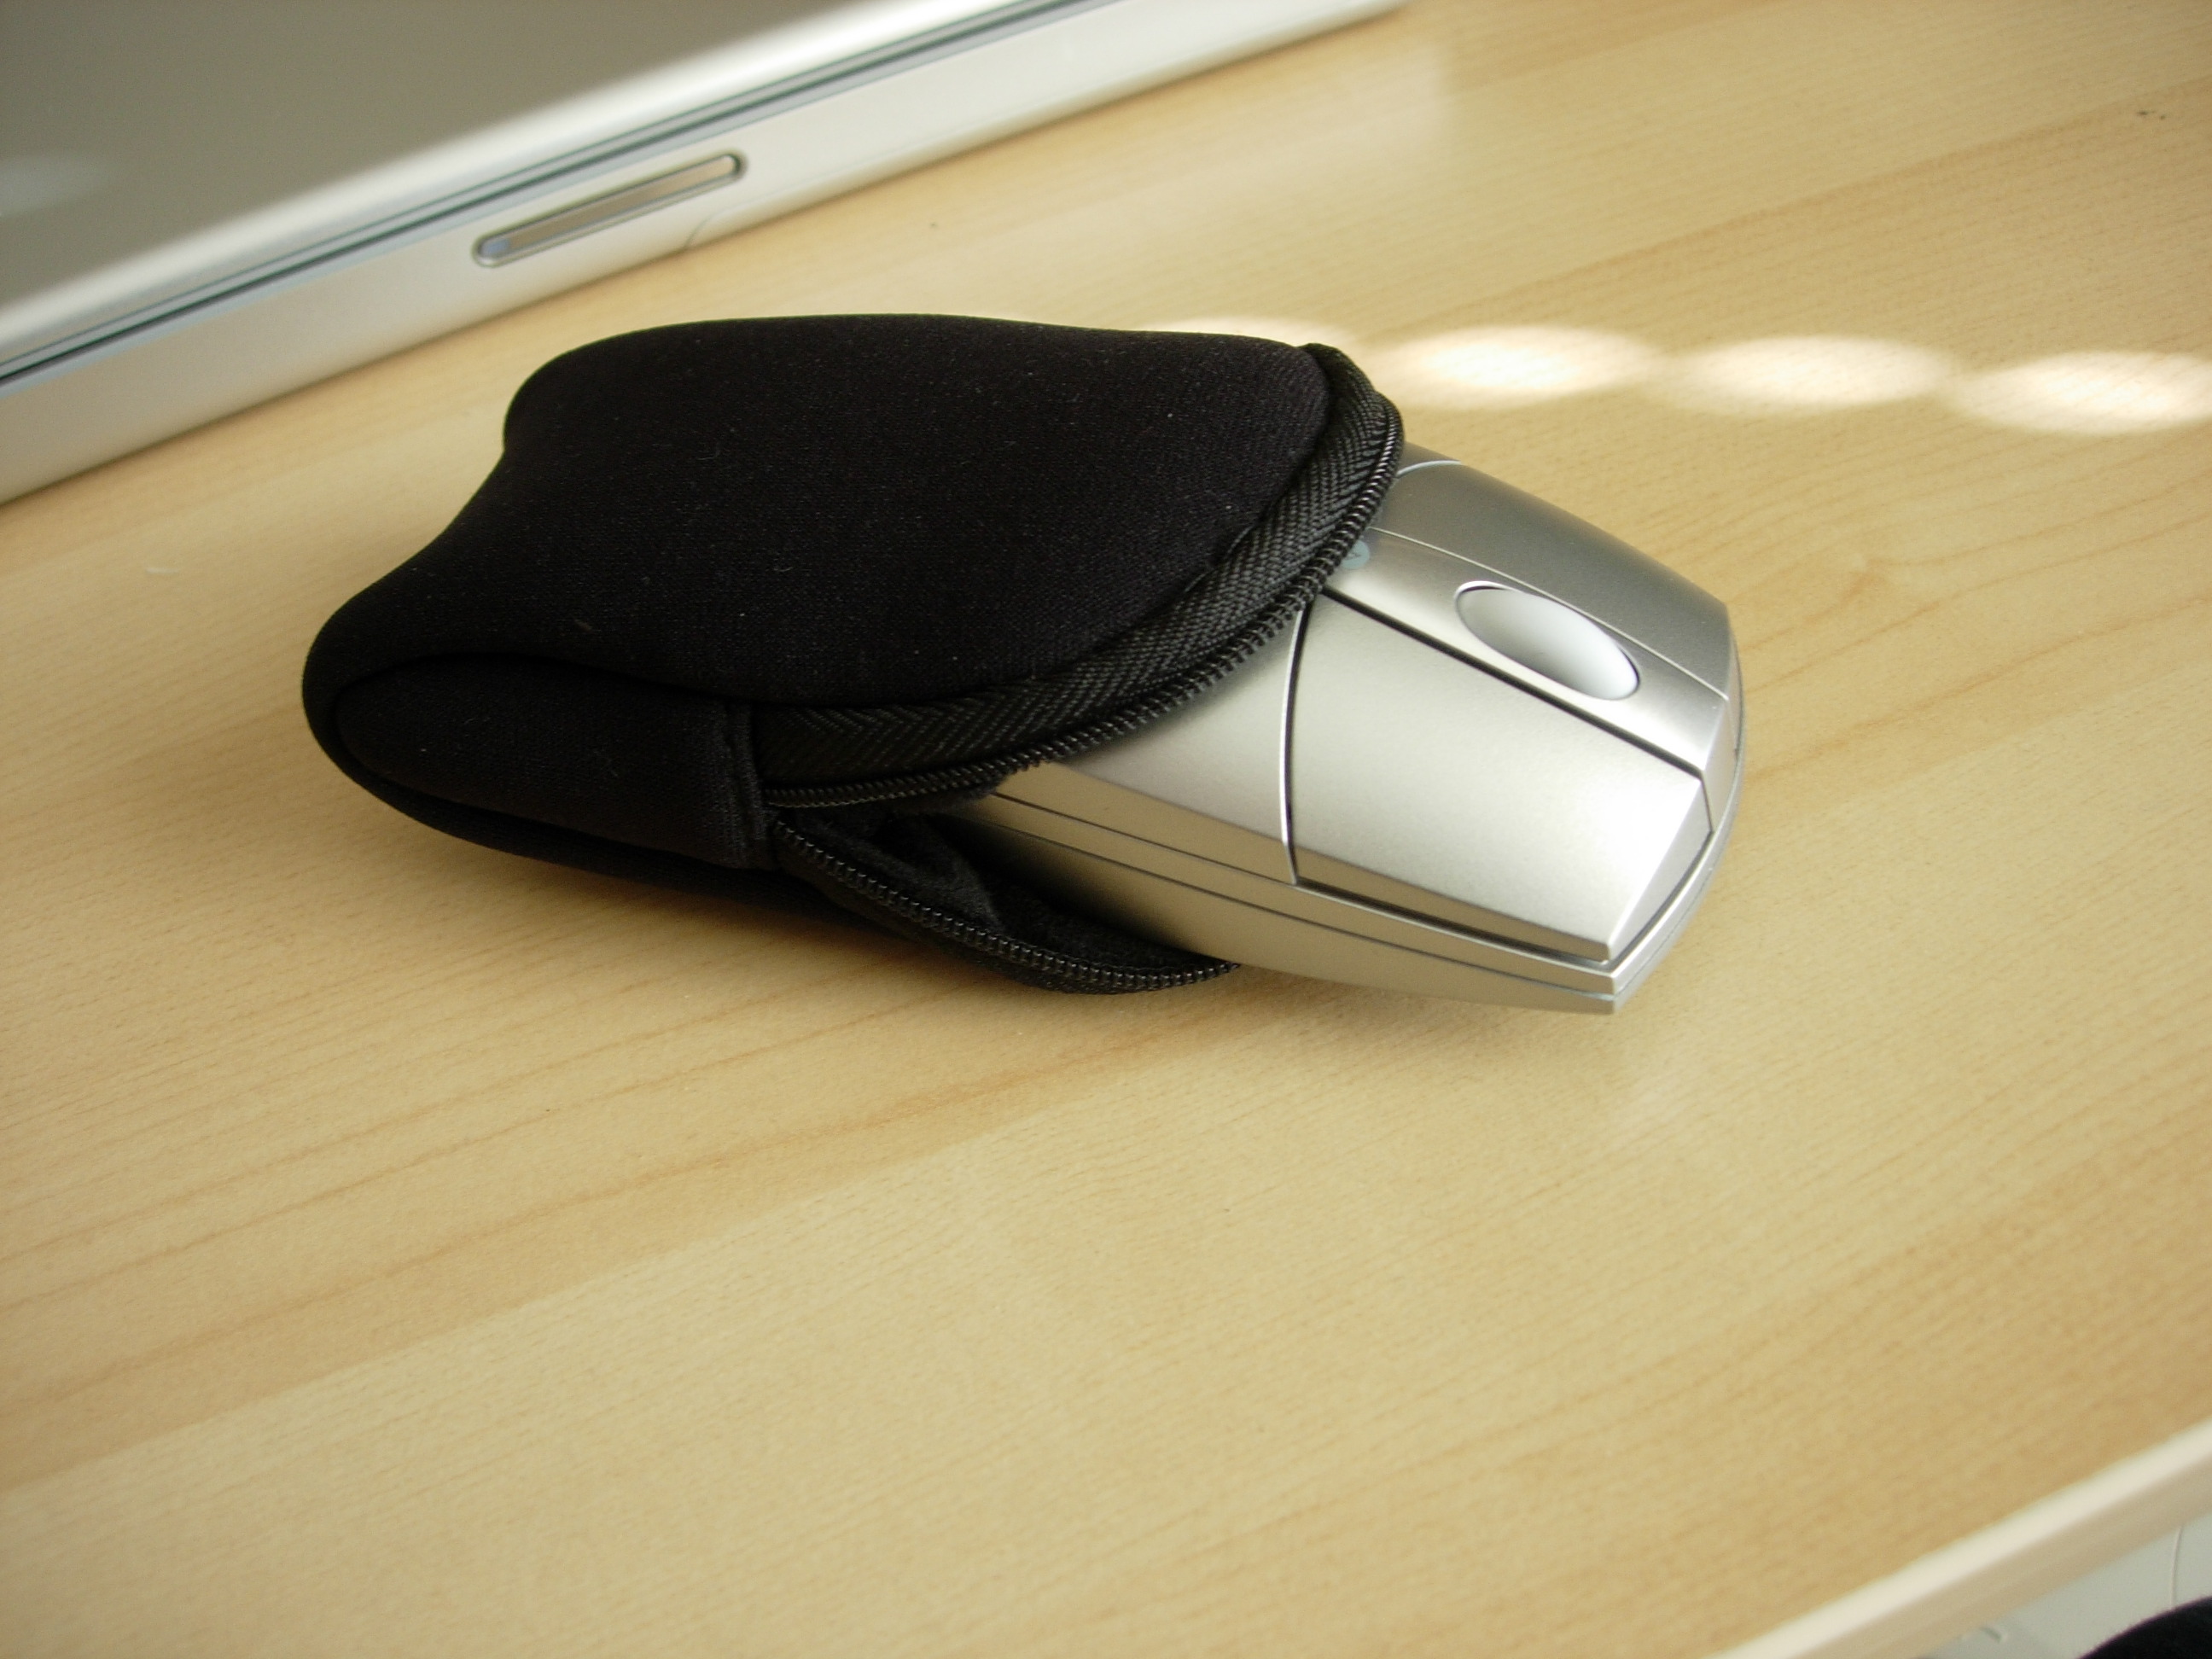 Silver computer mouse with neoprene case